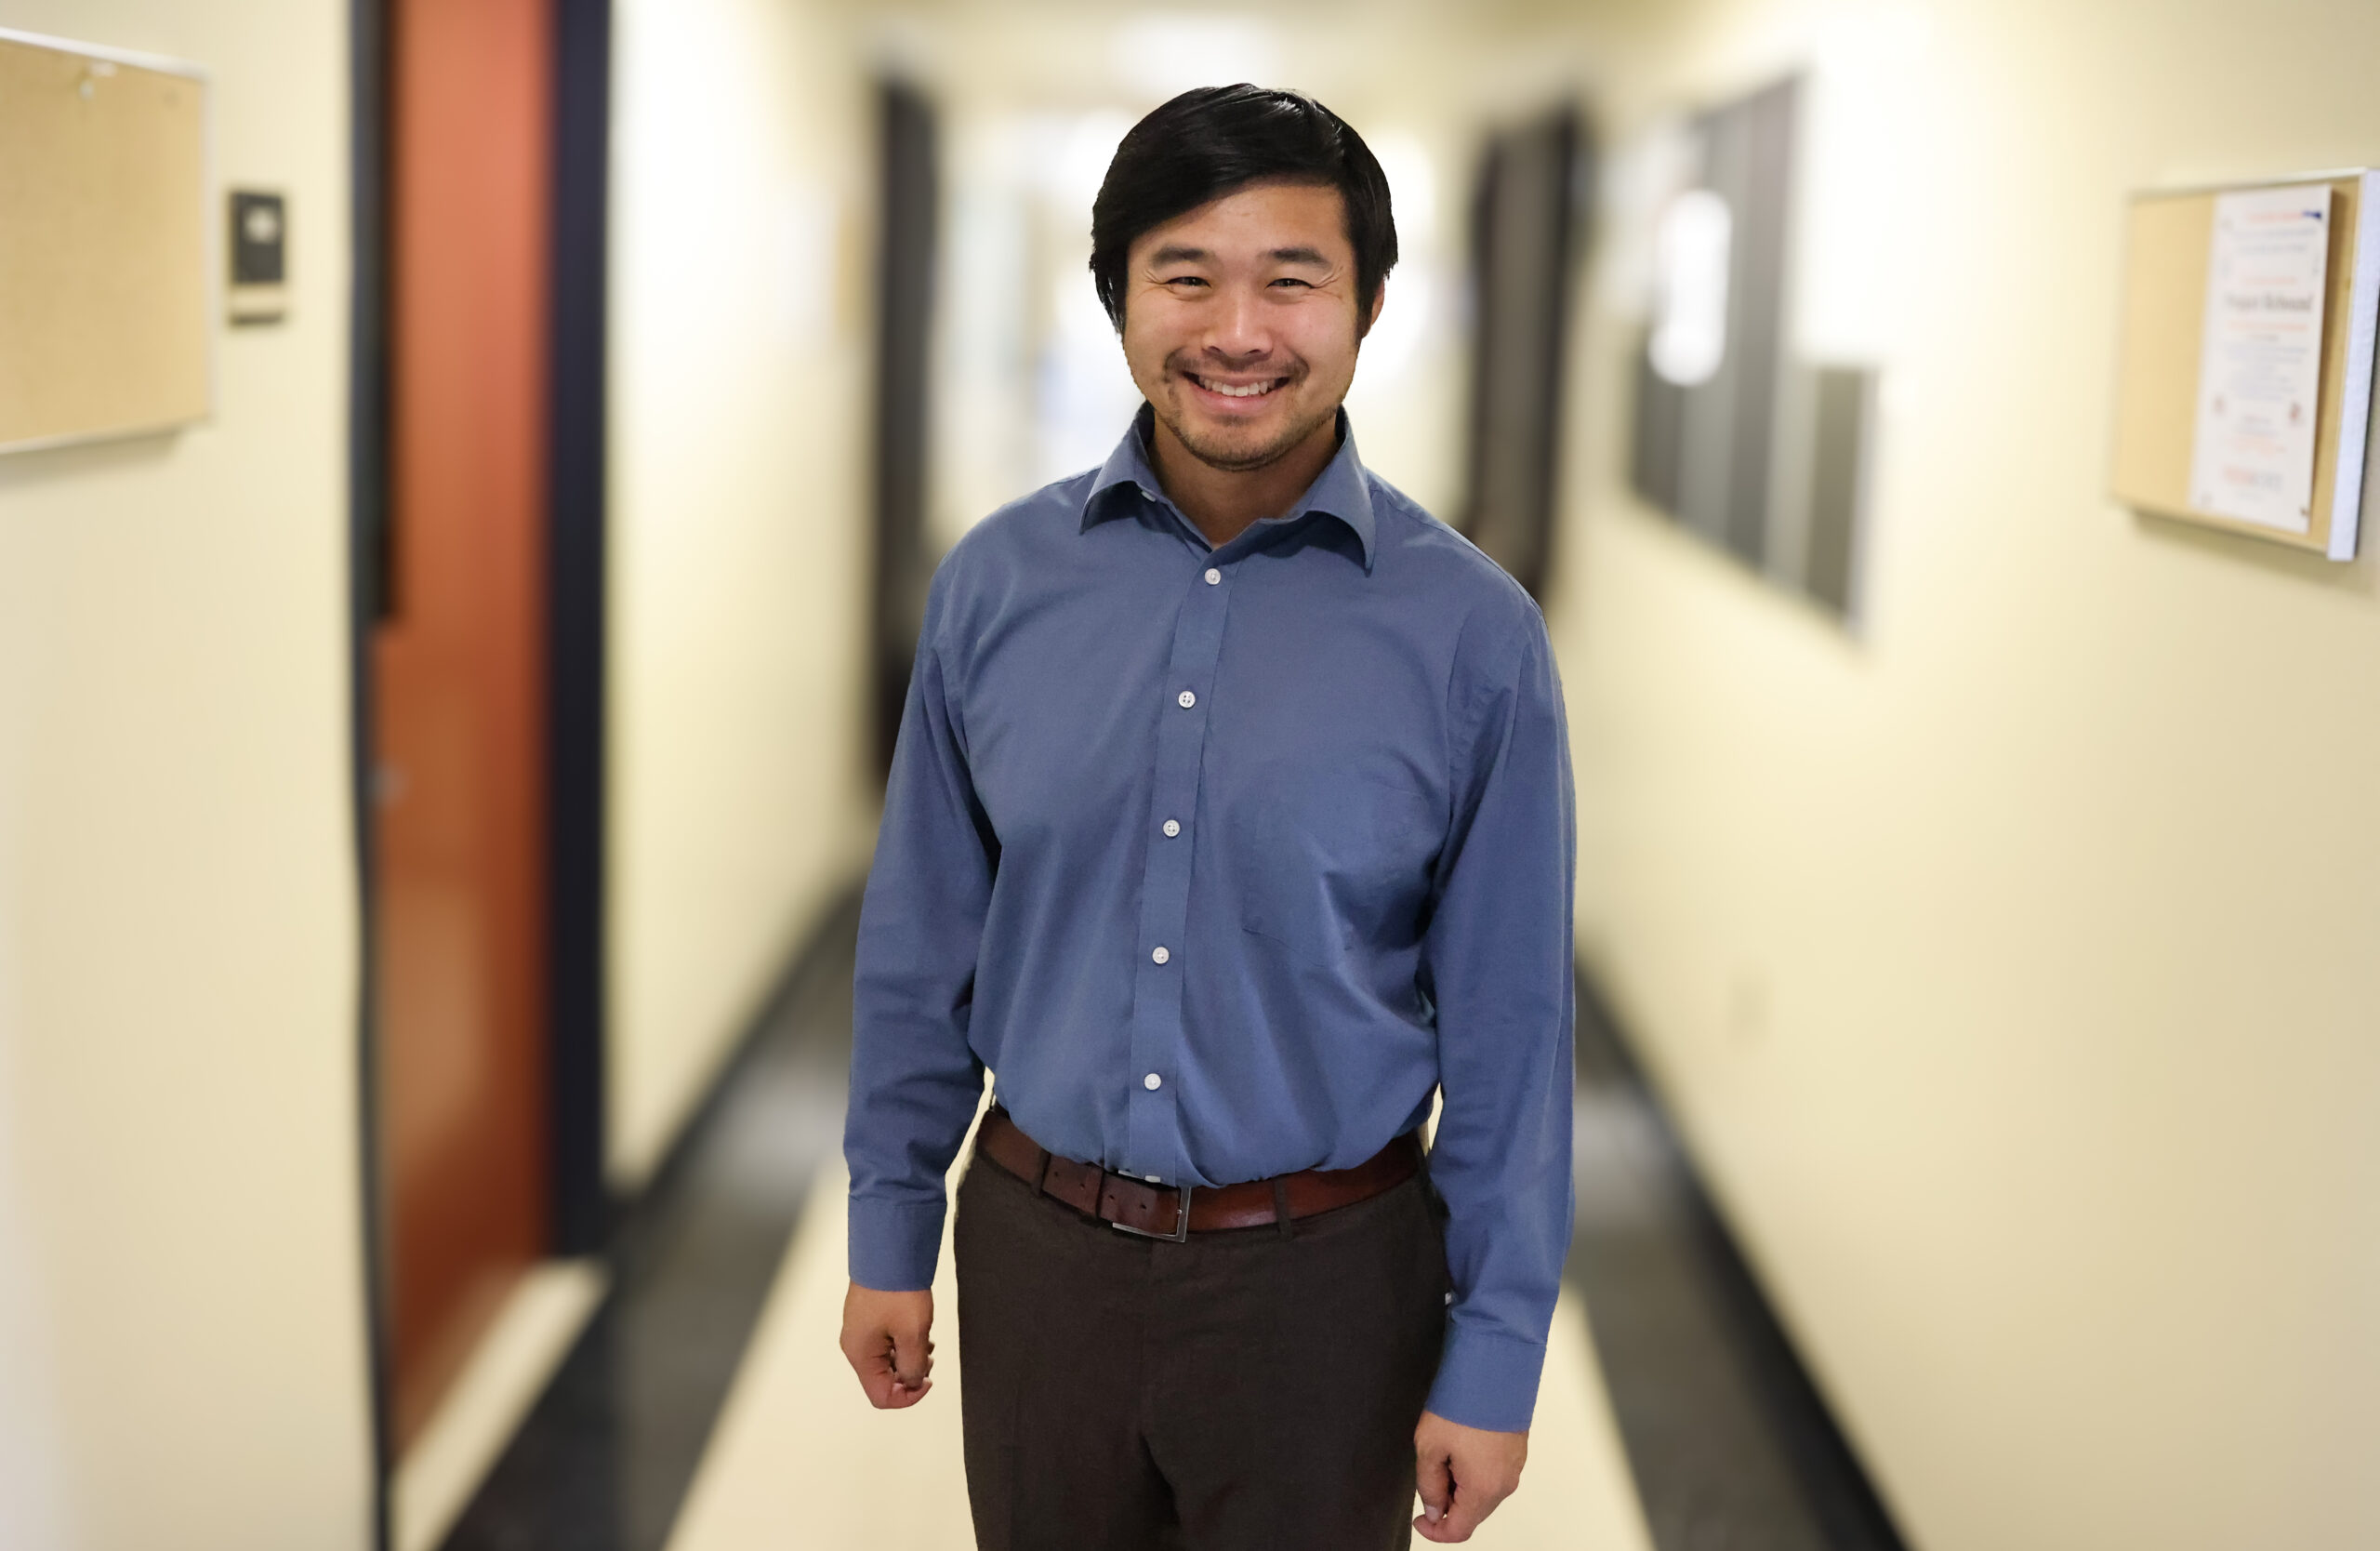 Mathematics Professor Howie Hua uses social media to promote his love for the subject.